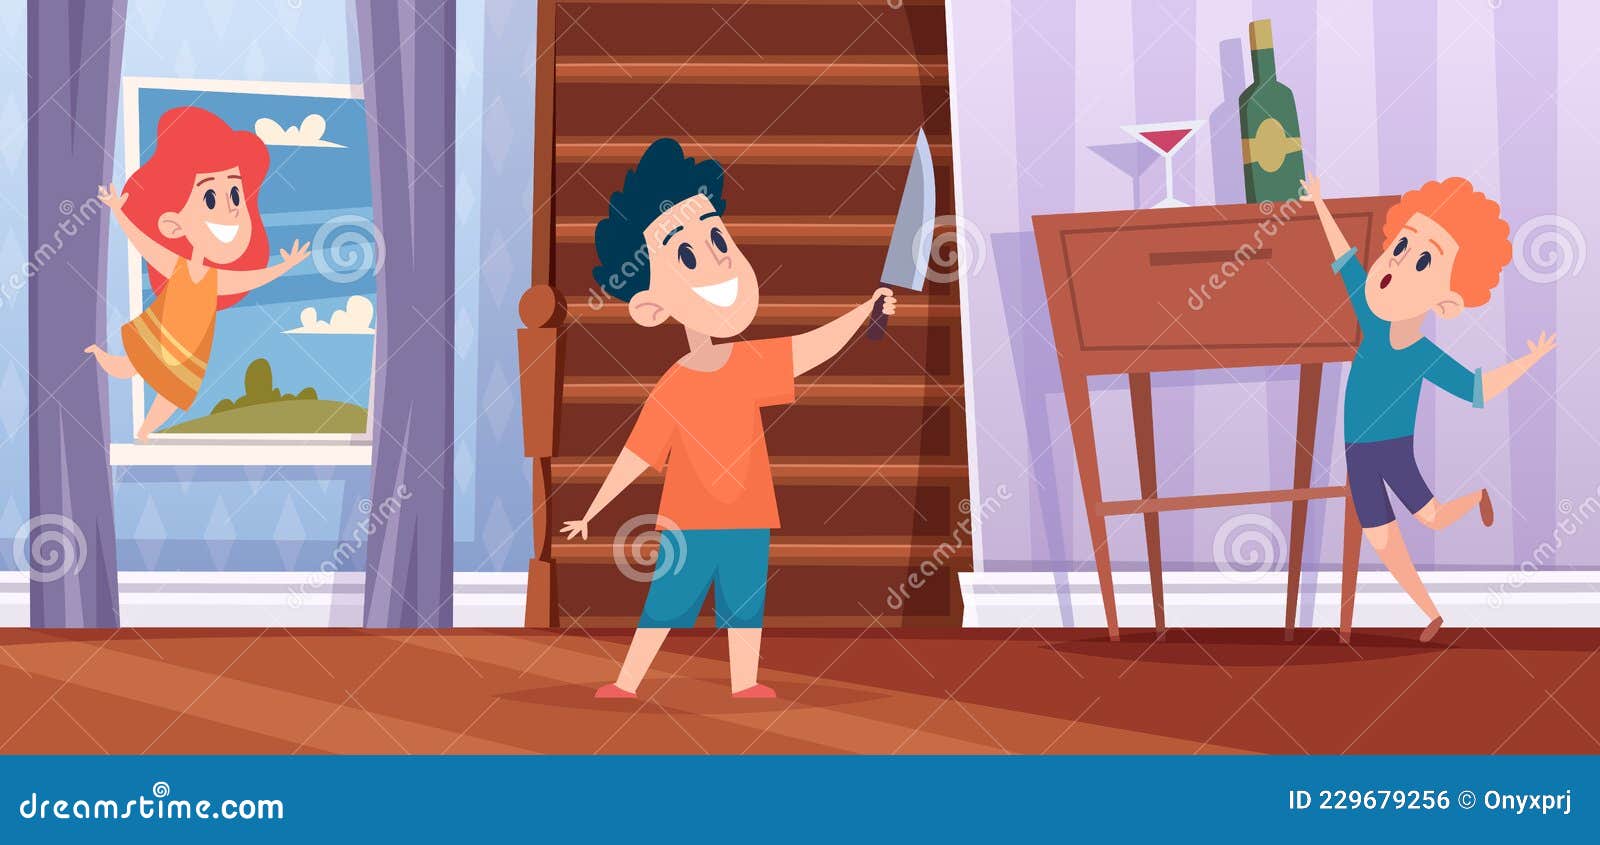 Kids Dangerous. Bad Games in Interior with Drugs Electricity Stranger Risk  Situation for Kids Exact Vector Cartoon Stock Vector - Illustration of  alert, childhood: 229679256